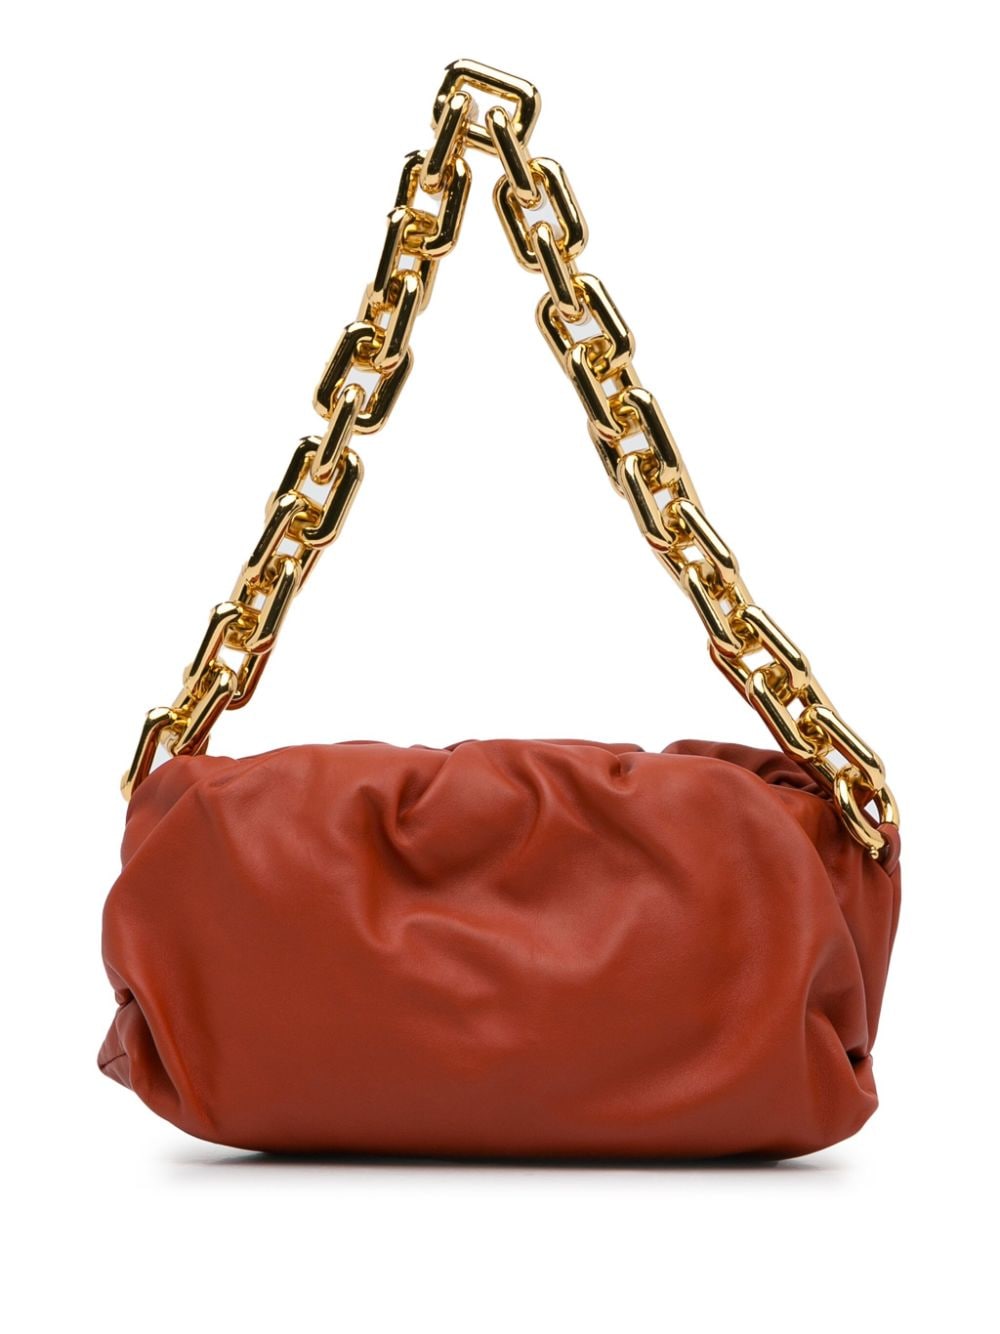 2012-present The Chain Pouch shoulder bag